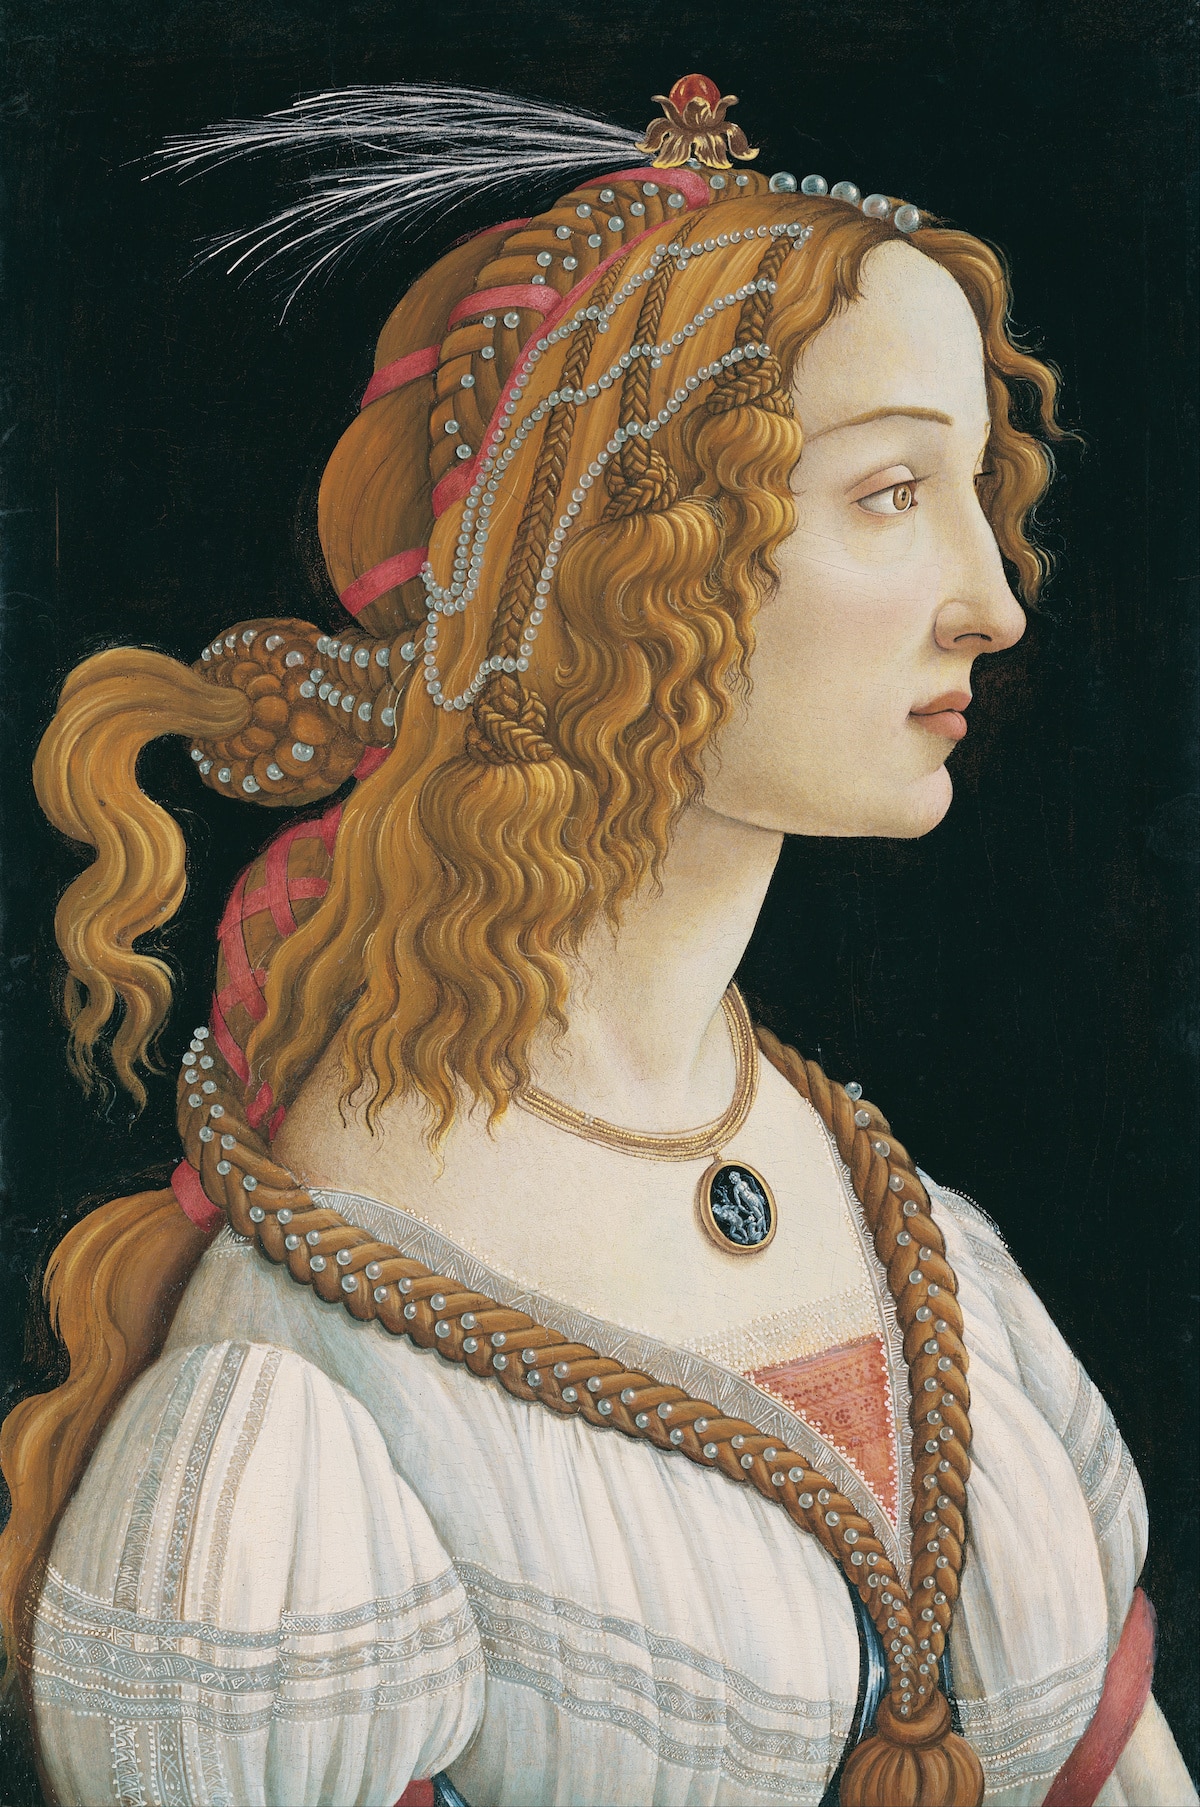 Painting by Sandro Boticelli called Portrait of a Lady. Featuring a woman sitting in profile with long hair.